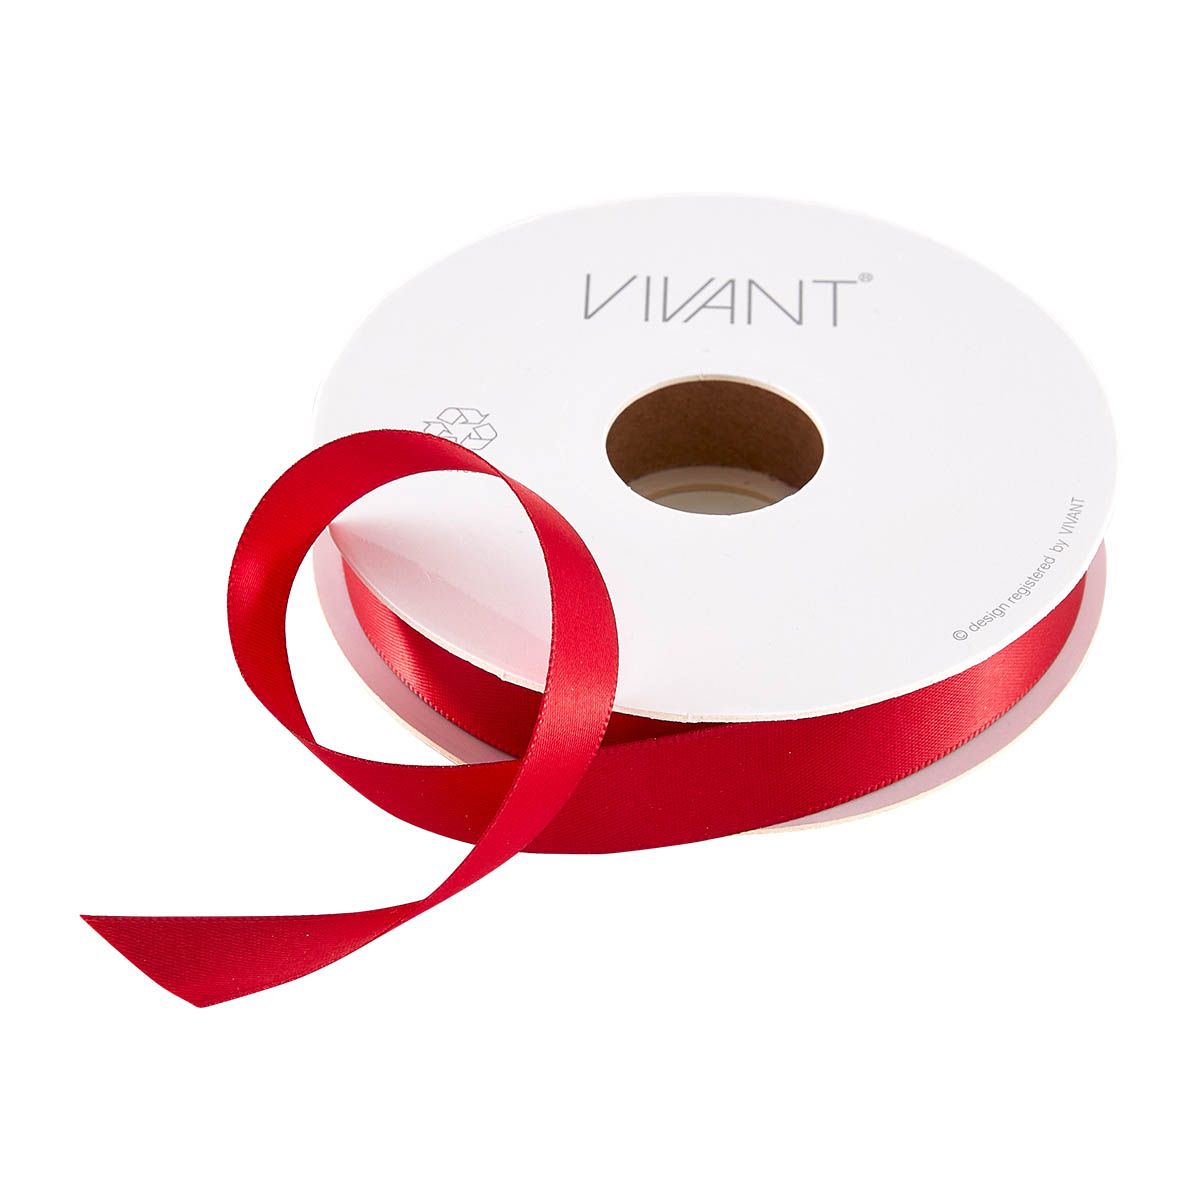 Double Faced Satin Ribbon - Red